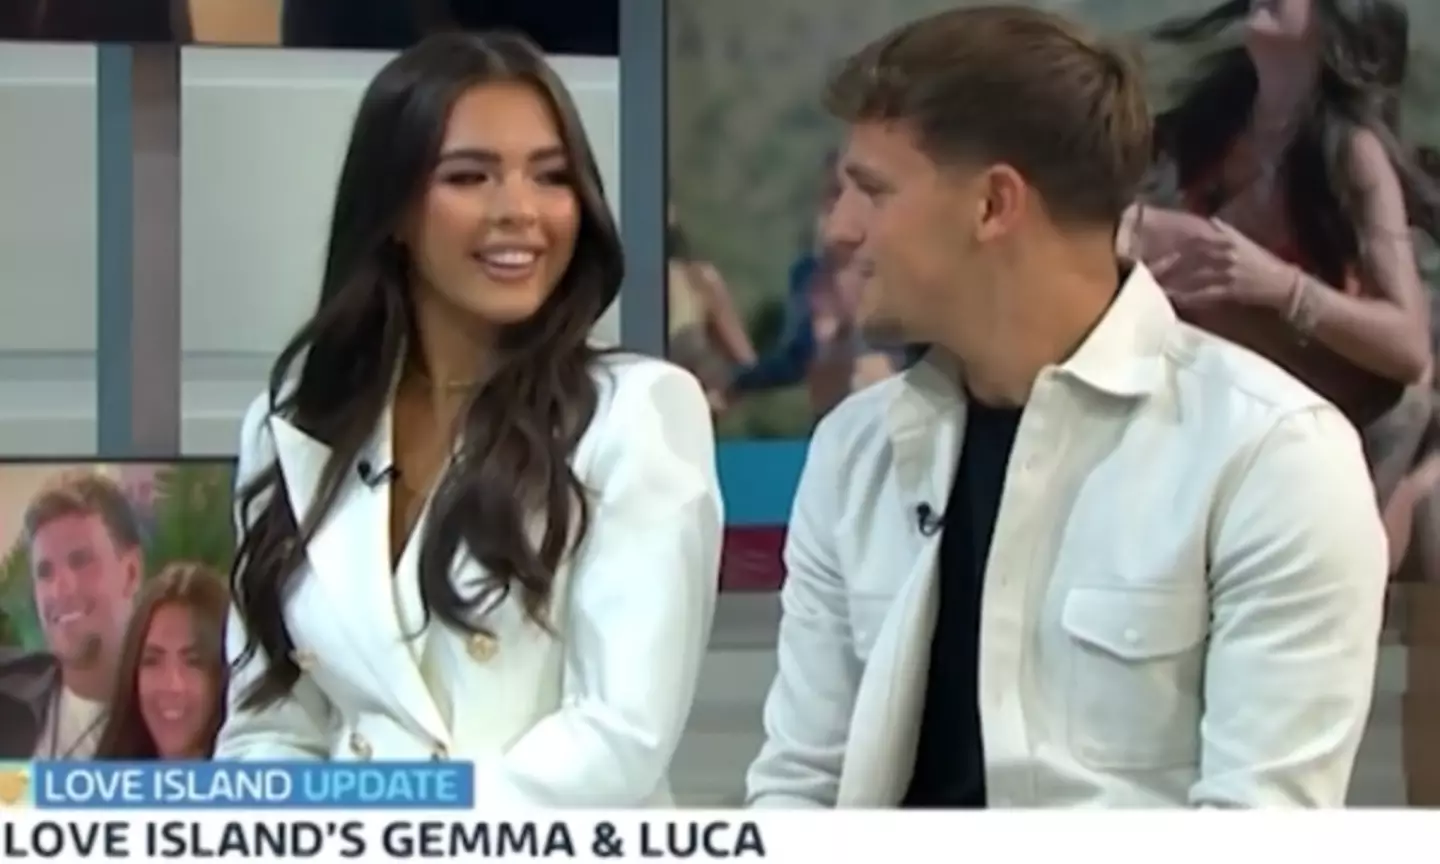 The couple appeared on GMB together.